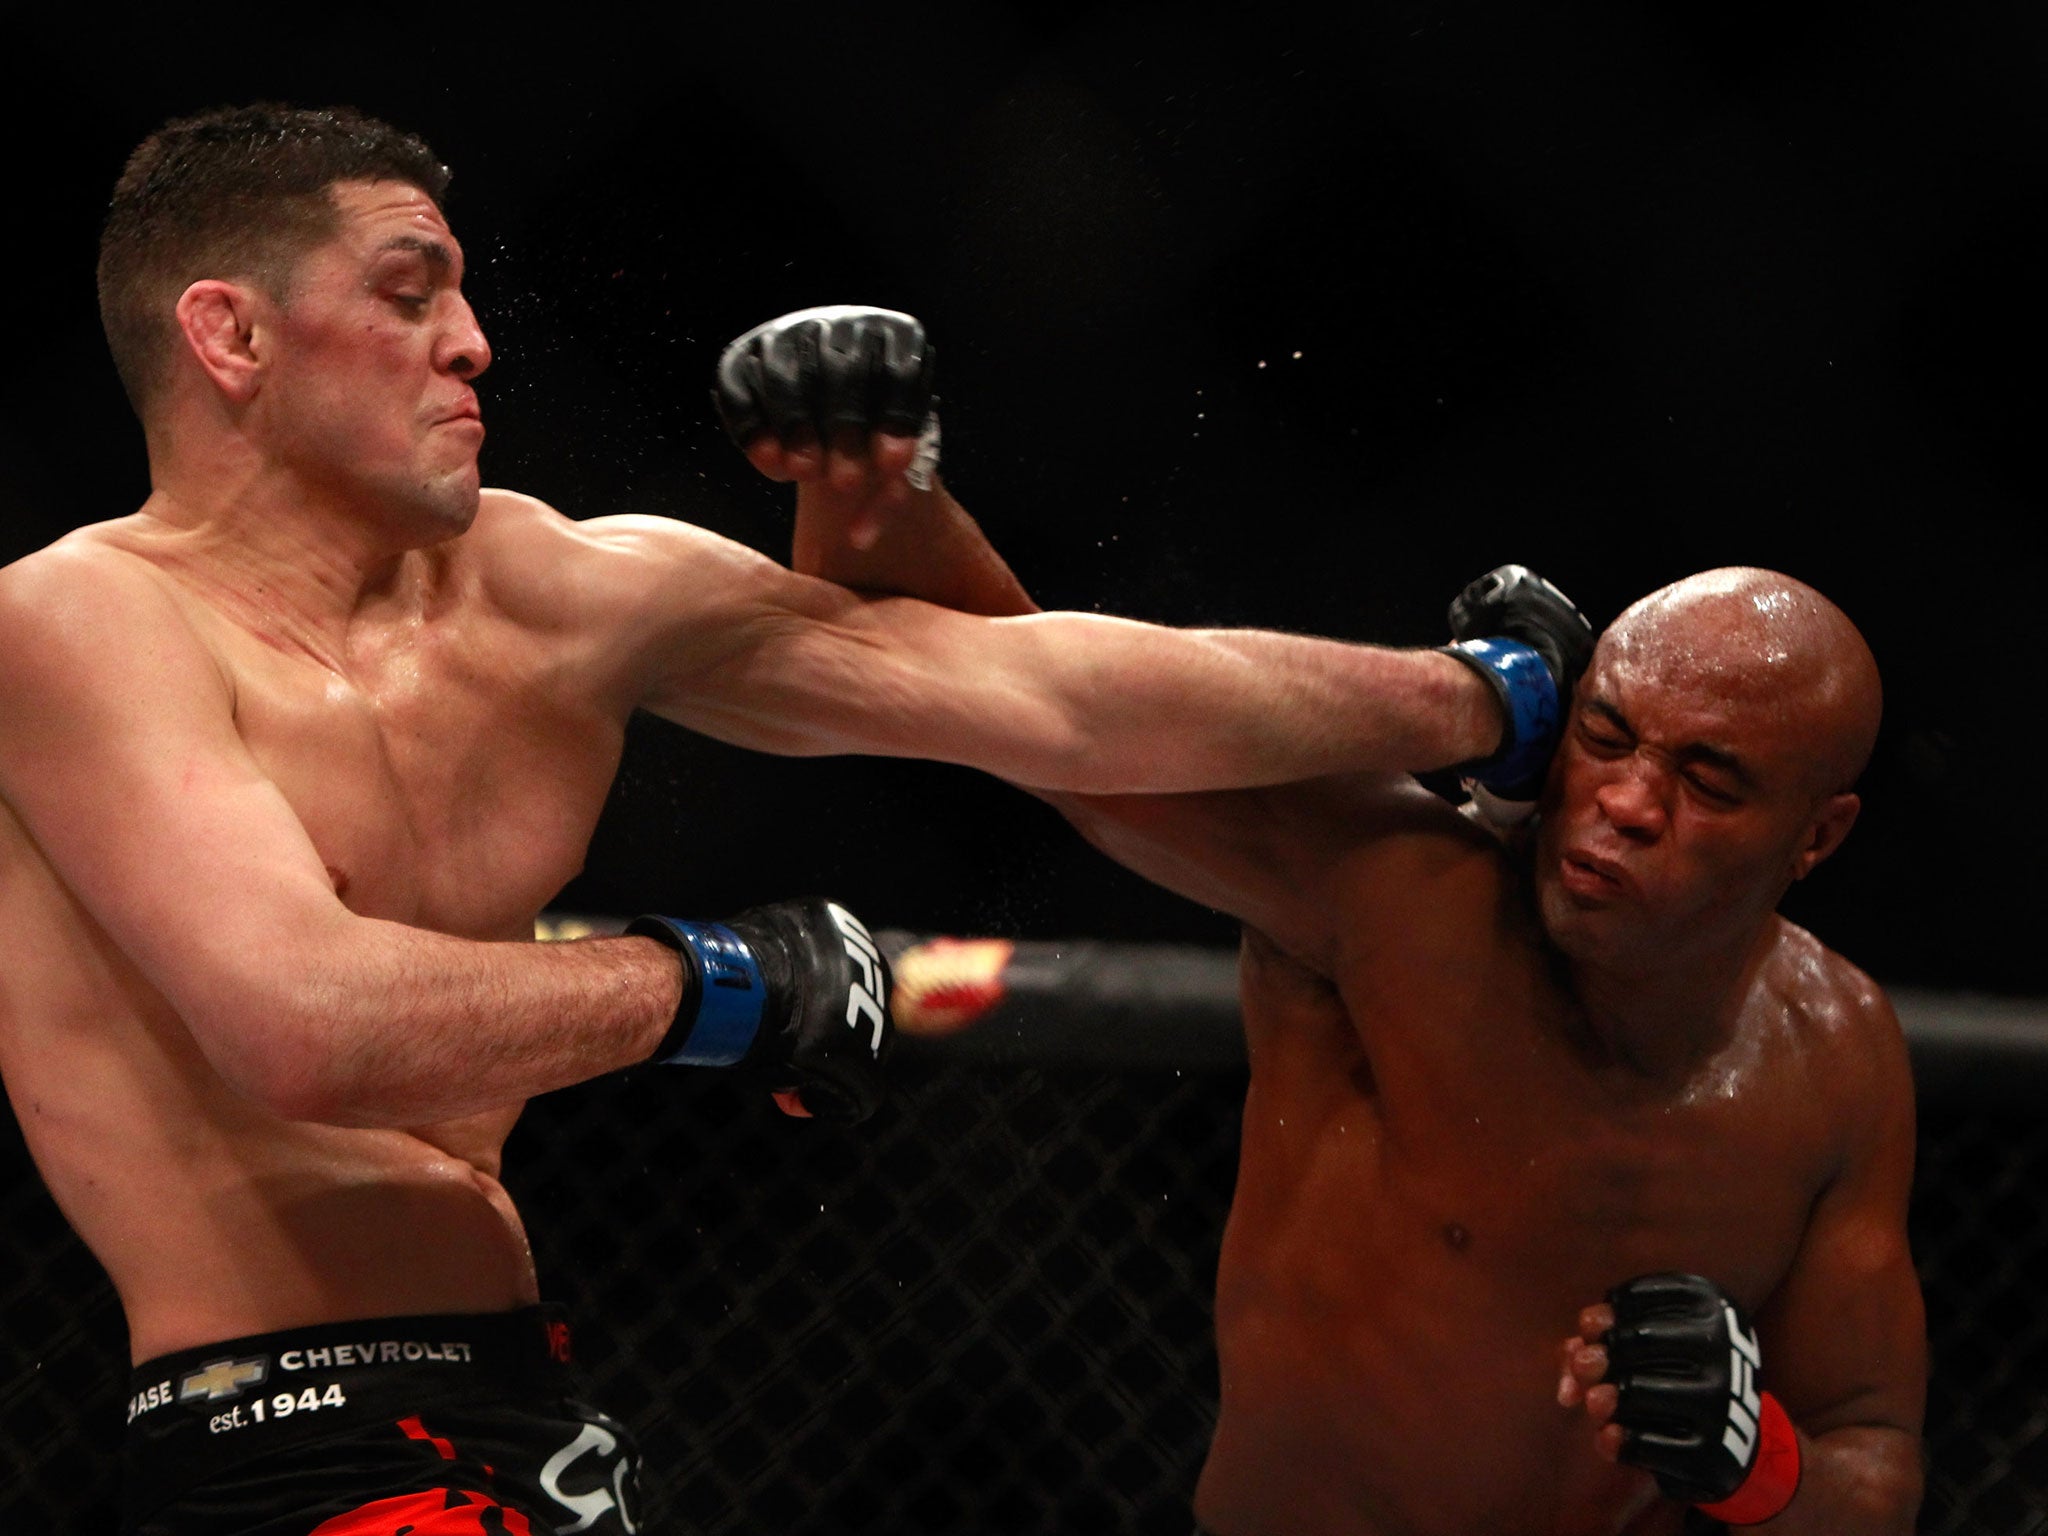 Anderson Silva and Nick Diaz trade blows during their fight at UFC 183 last weekend